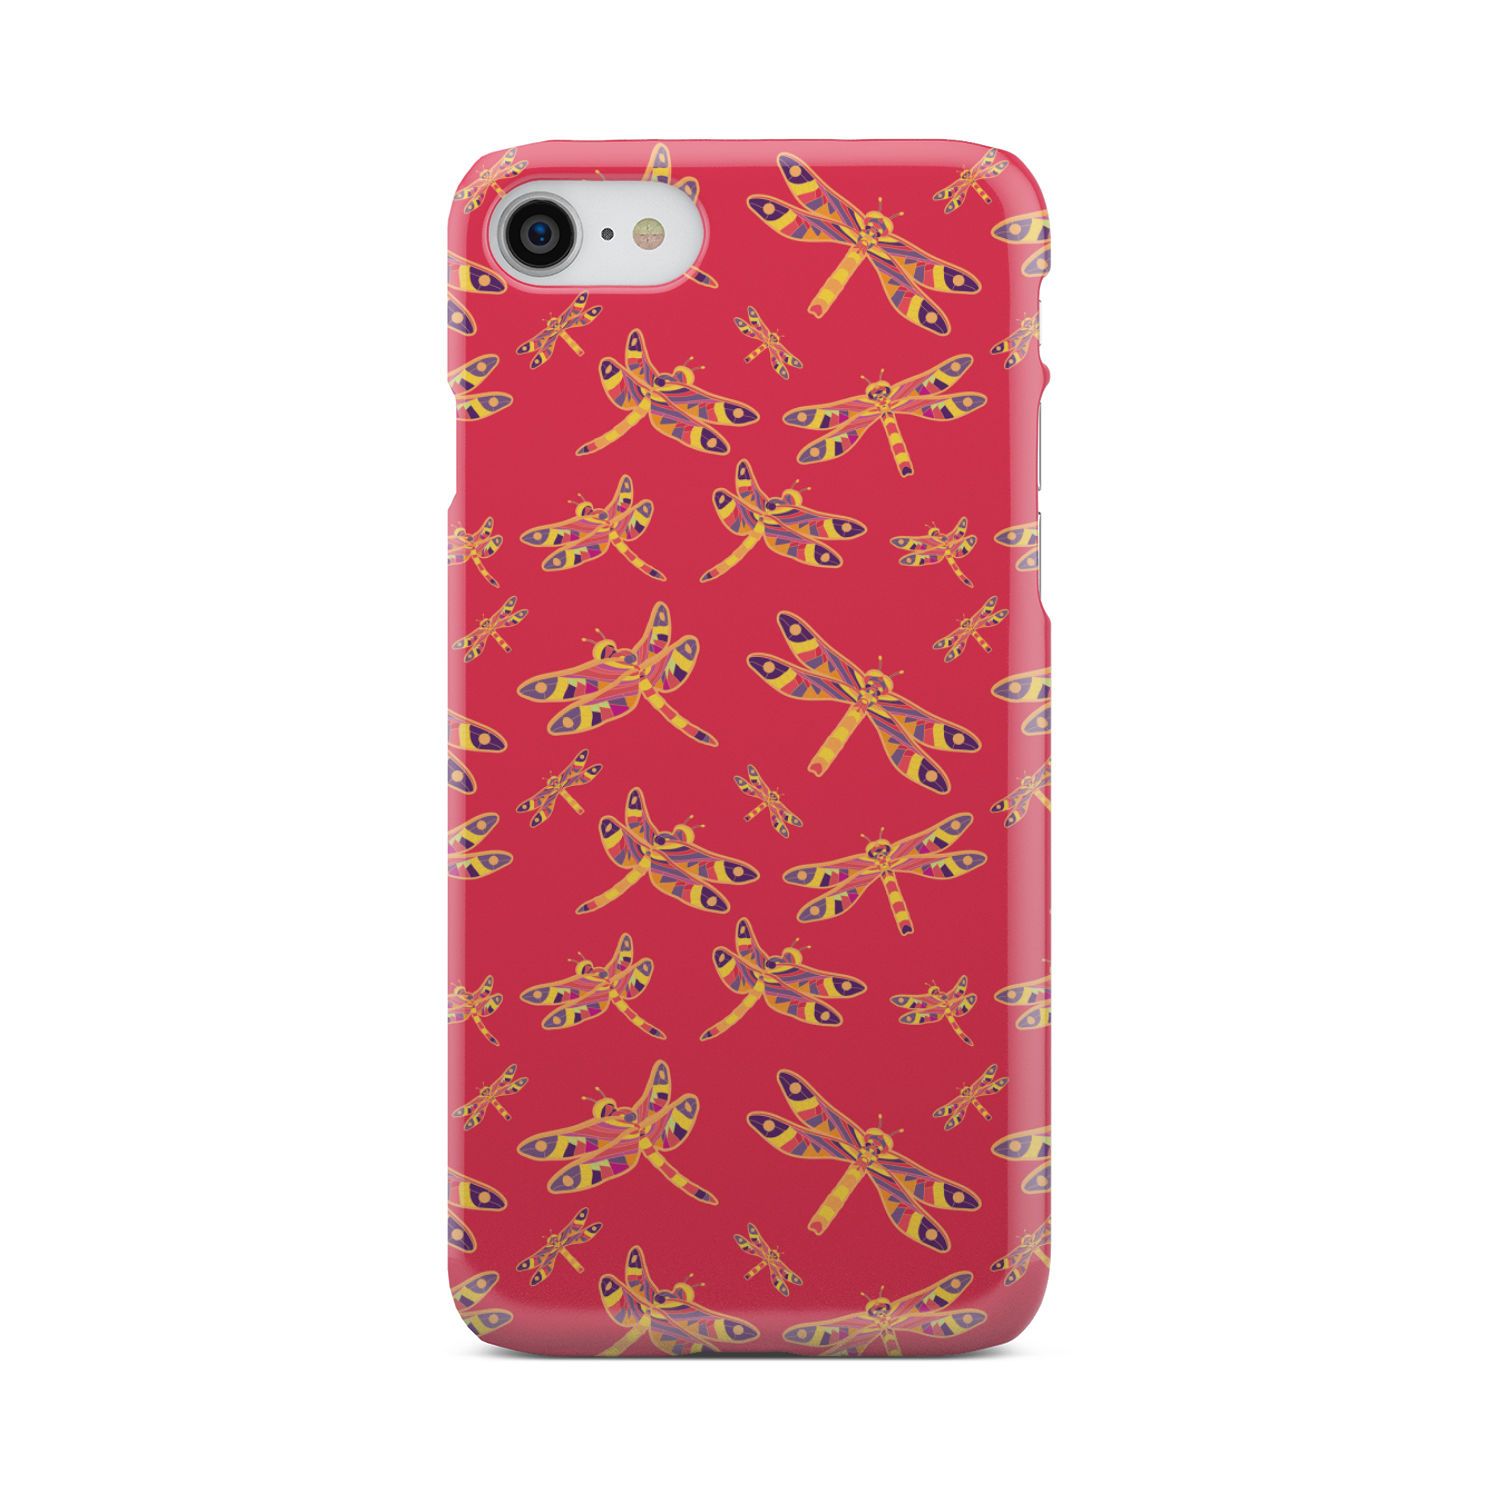 Gathering Rouge Phone Case Phone Case wc-fulfillment iPhone 7 